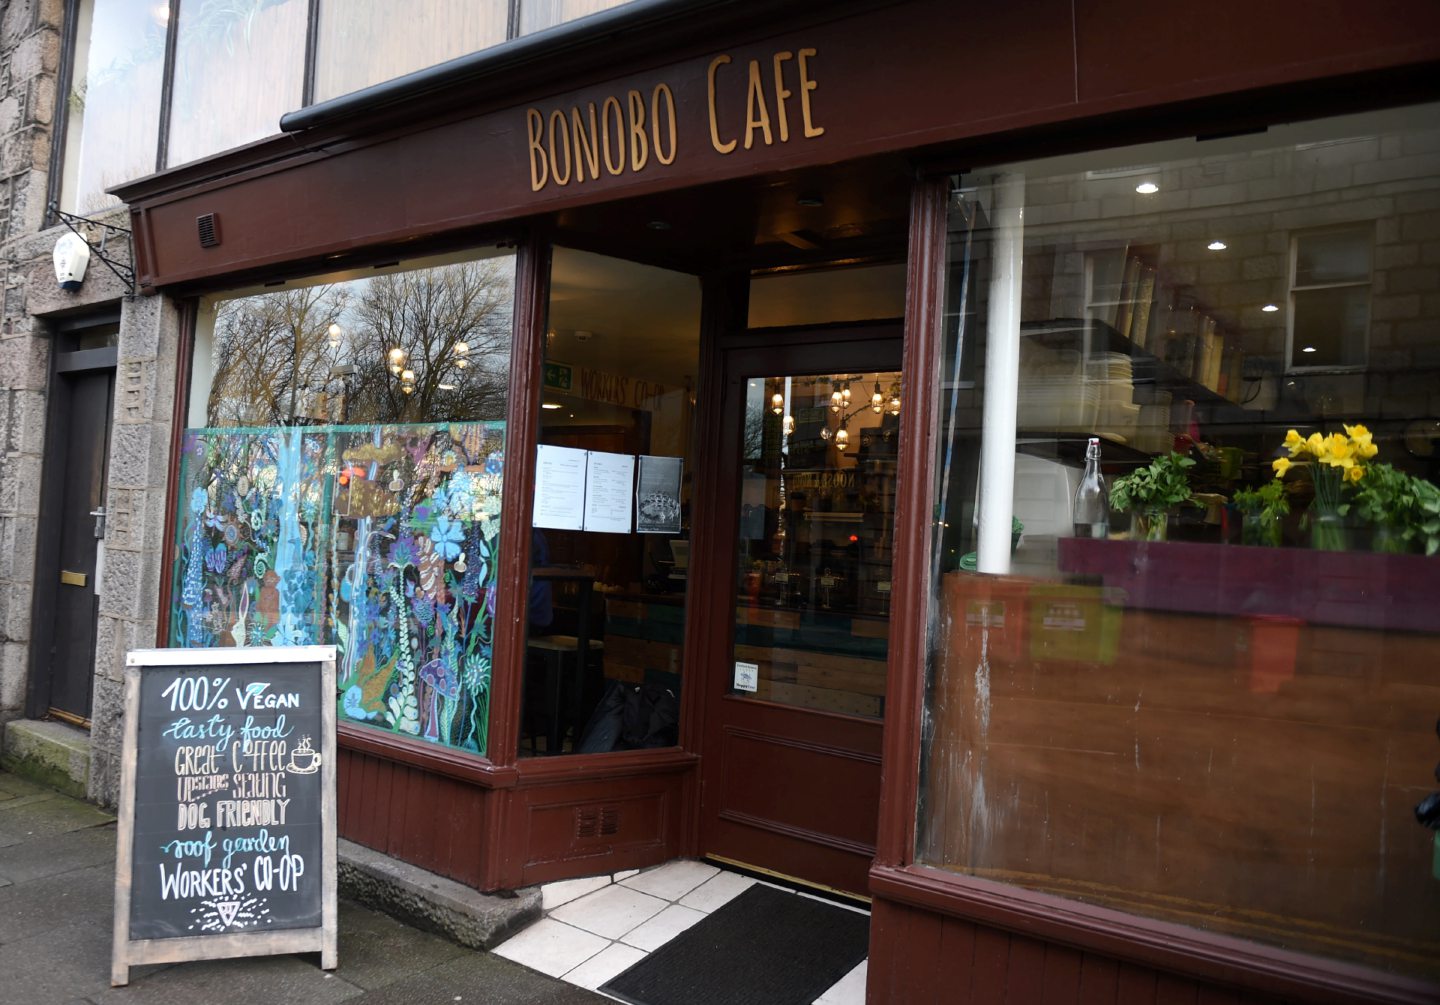 The outside of the Bonobo Cafe in Aberdeen